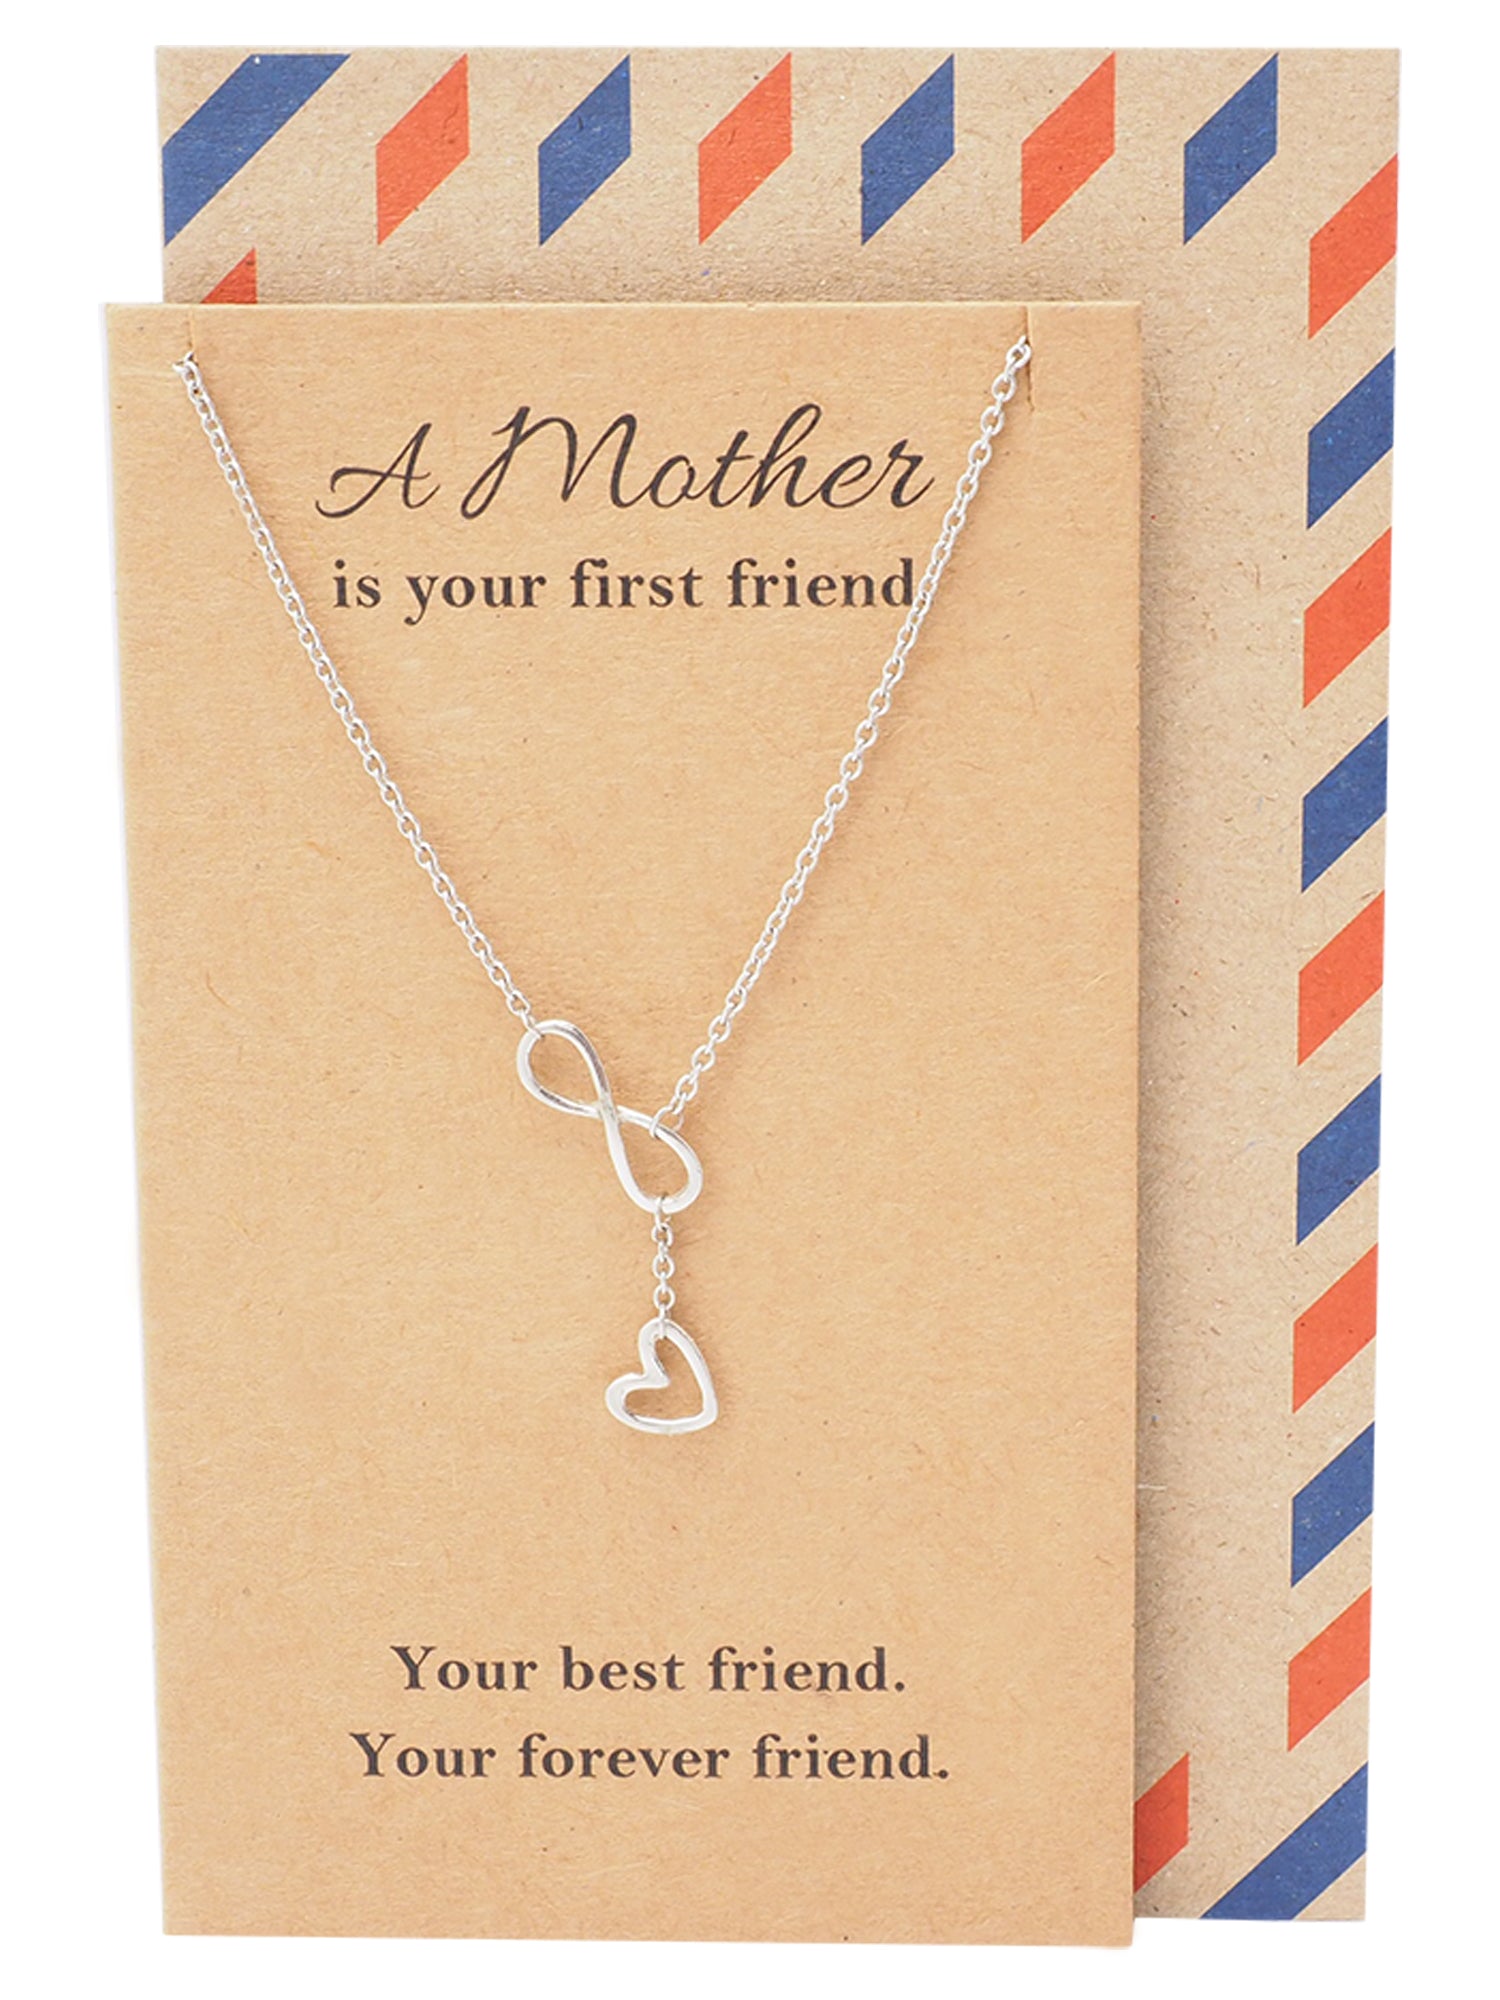 Lorna Infinity Heart Lariat Mothers Necklace, Mothers Day Jewelr